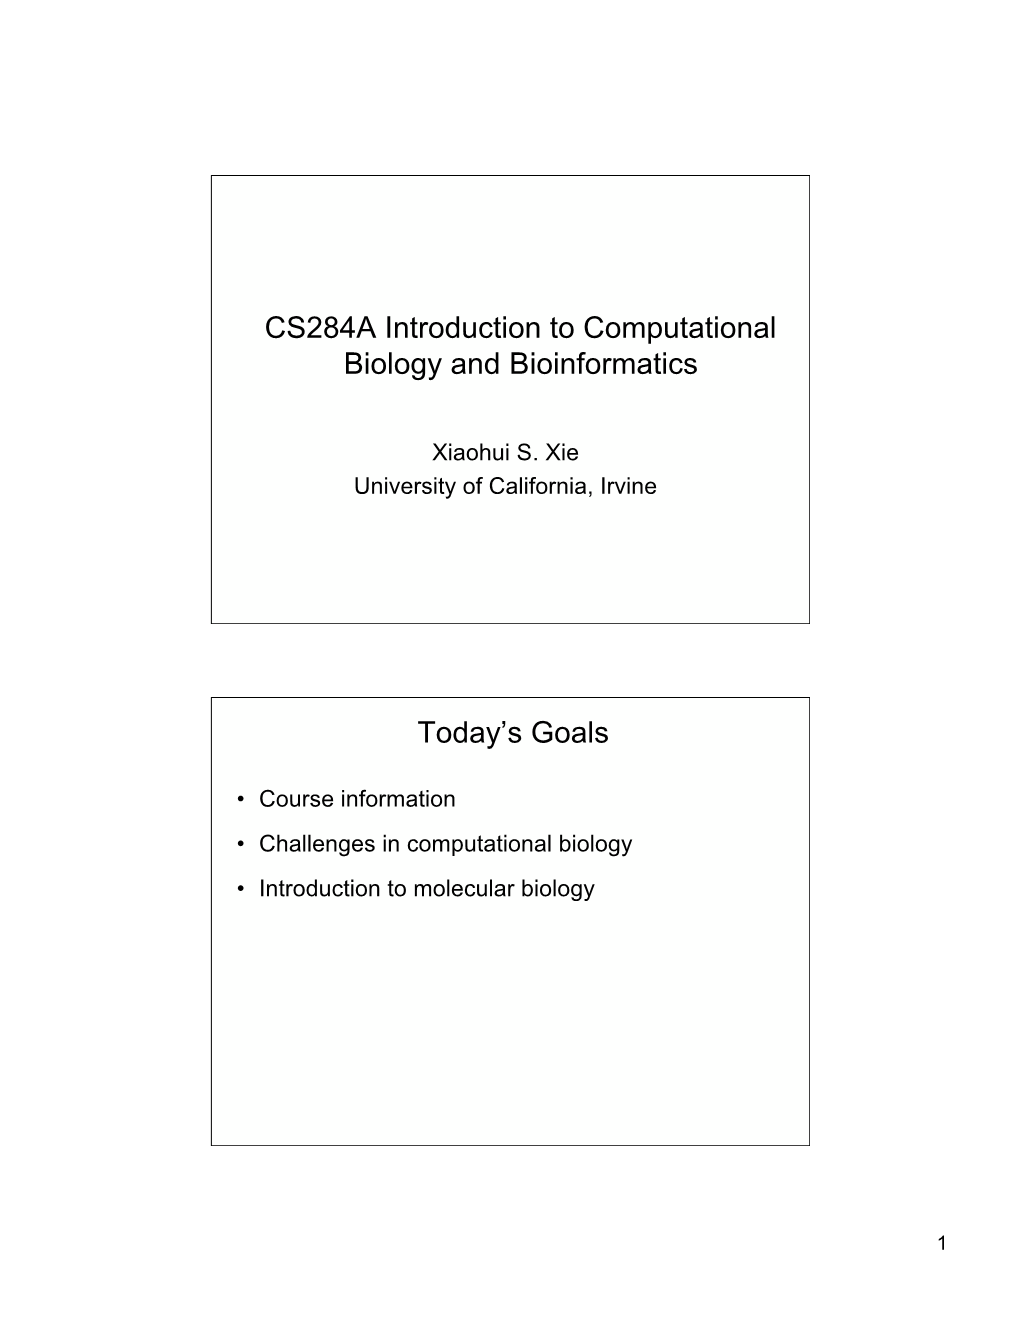 CS284A Introduction to Computational Biology and Bioinformatics Today's